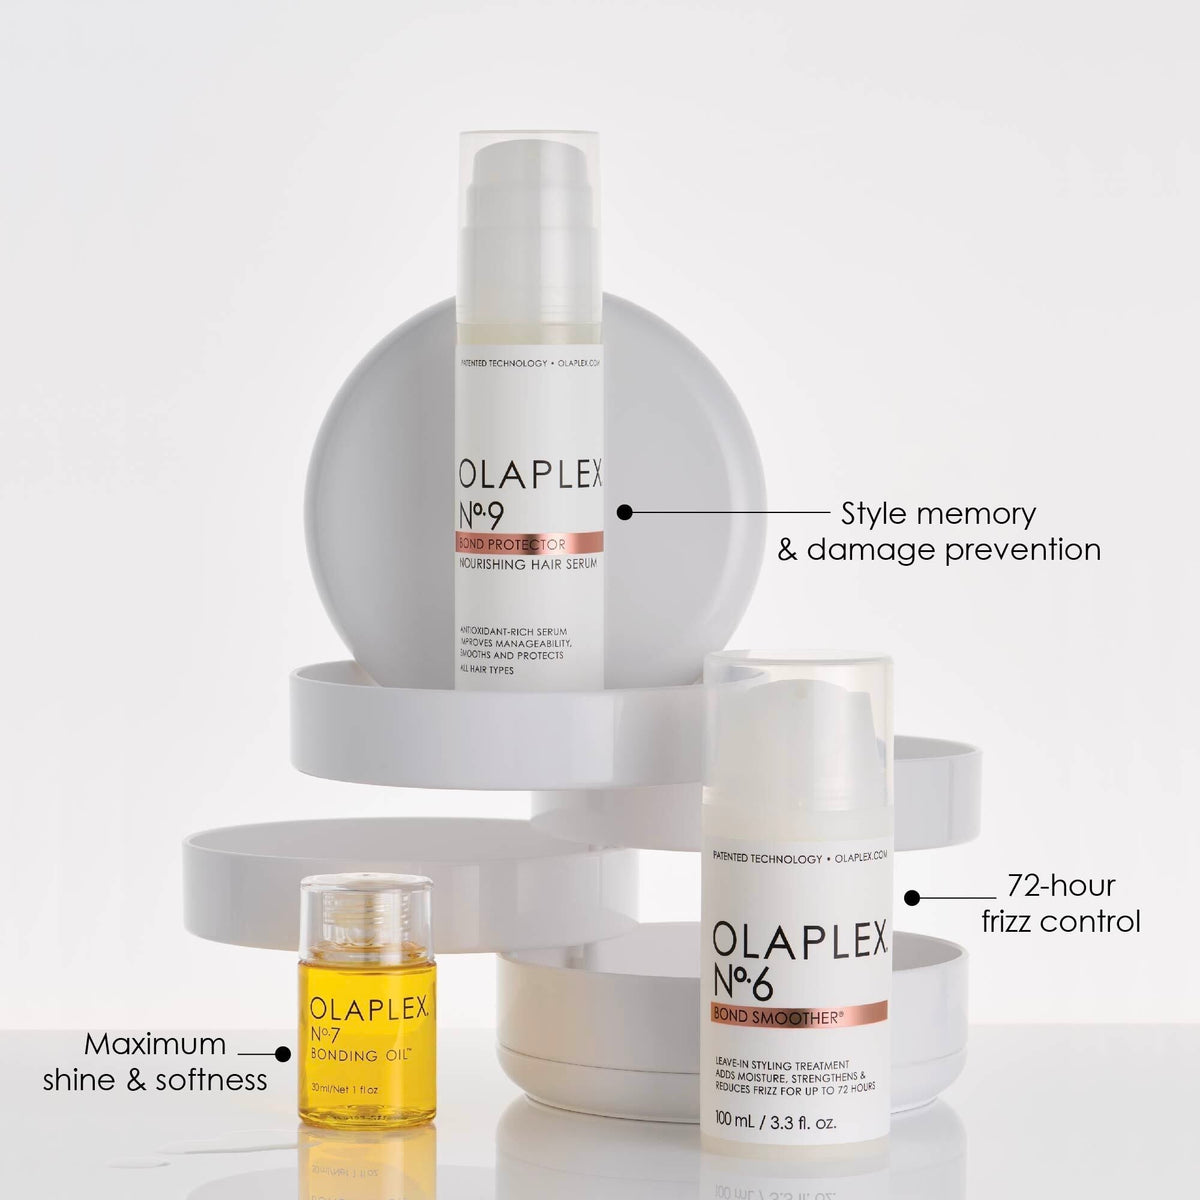 THE COMPLETE HAIR REPAIR SYSTEM